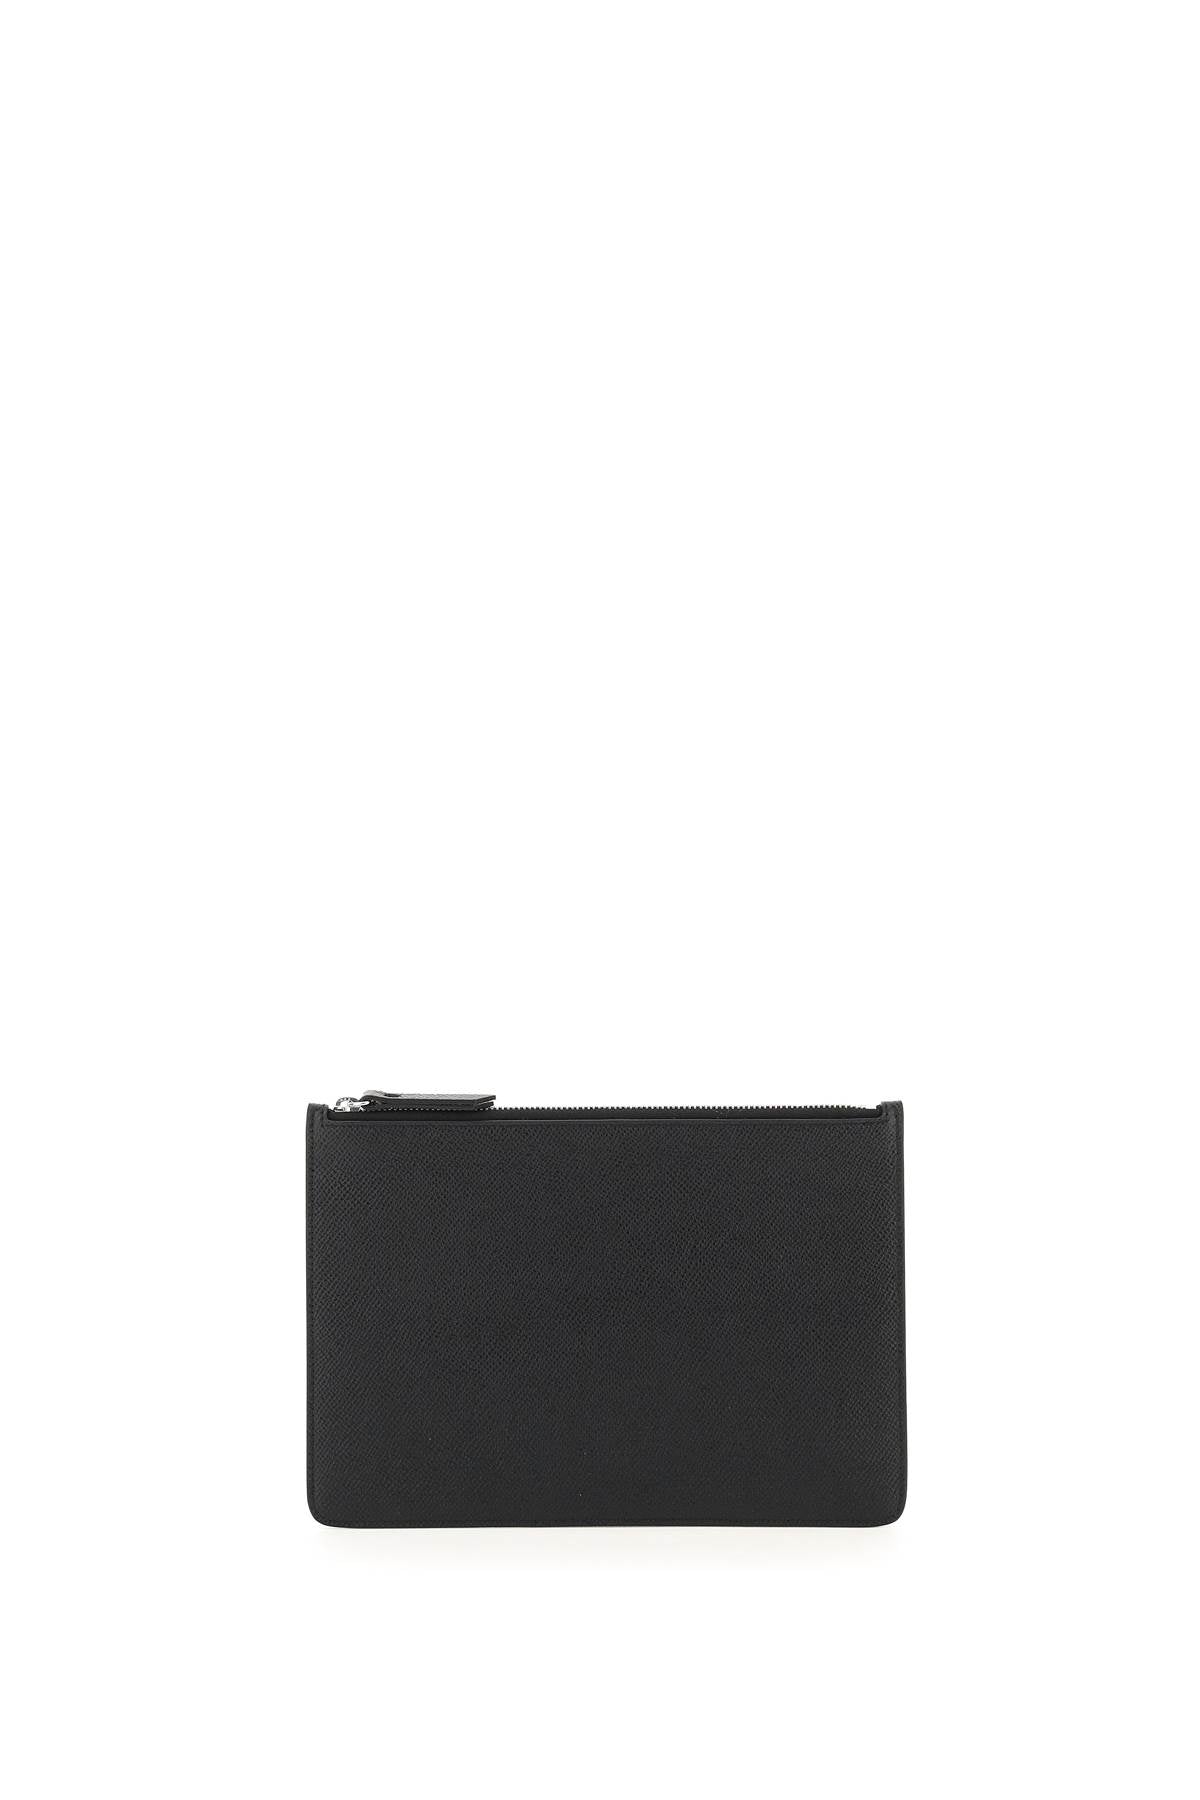 Maison margiela grained leather small pouch-0